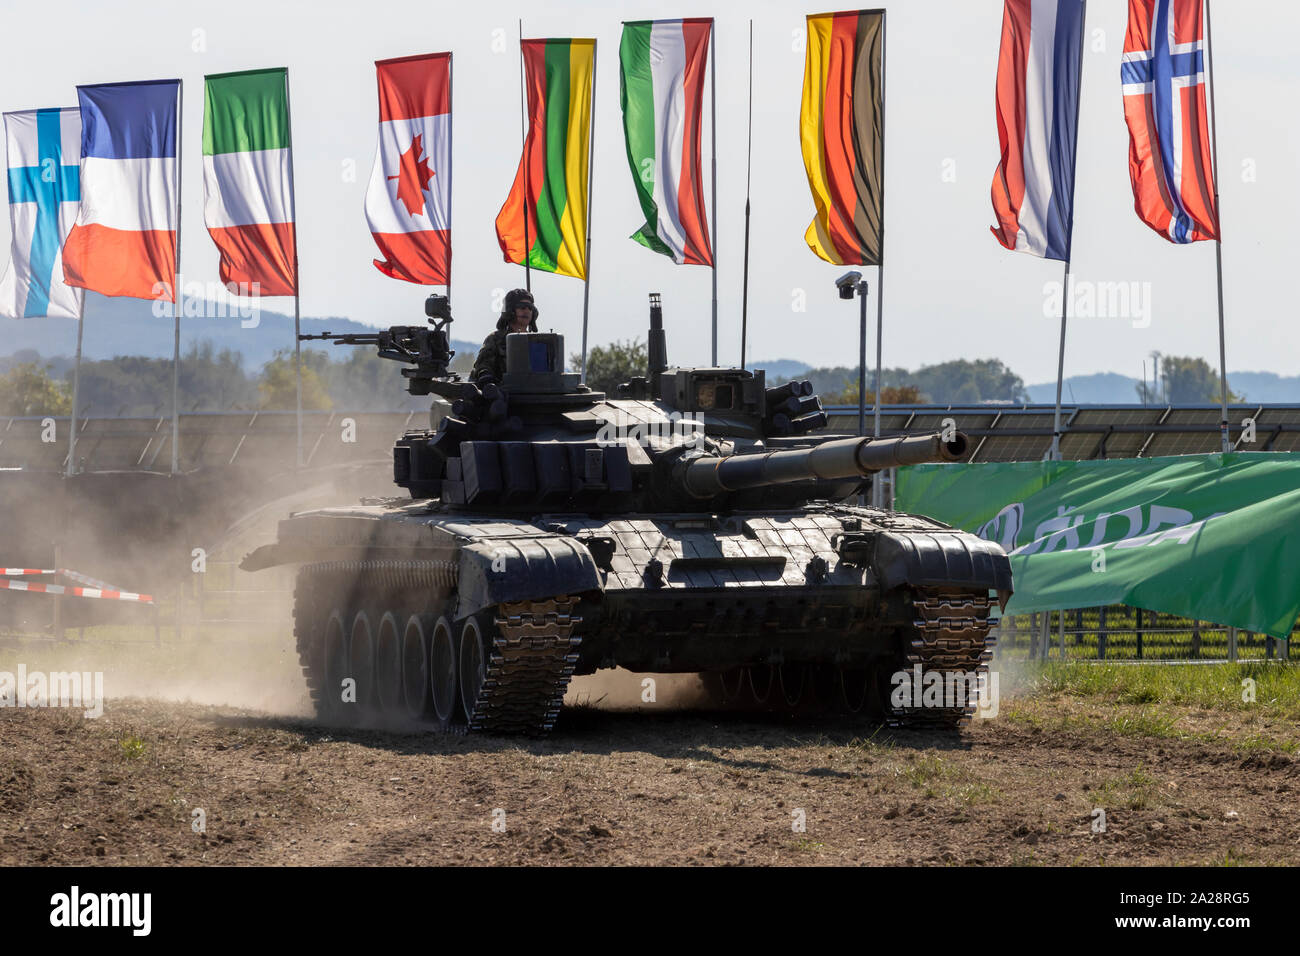 OSTRAVA, CZECH REPUBLIC - SEPTEMBER 22, 2019: NATO Days. Old Russian T-72 tank of the Czech armed forces travels under flags of NATO countries. Stock Photo